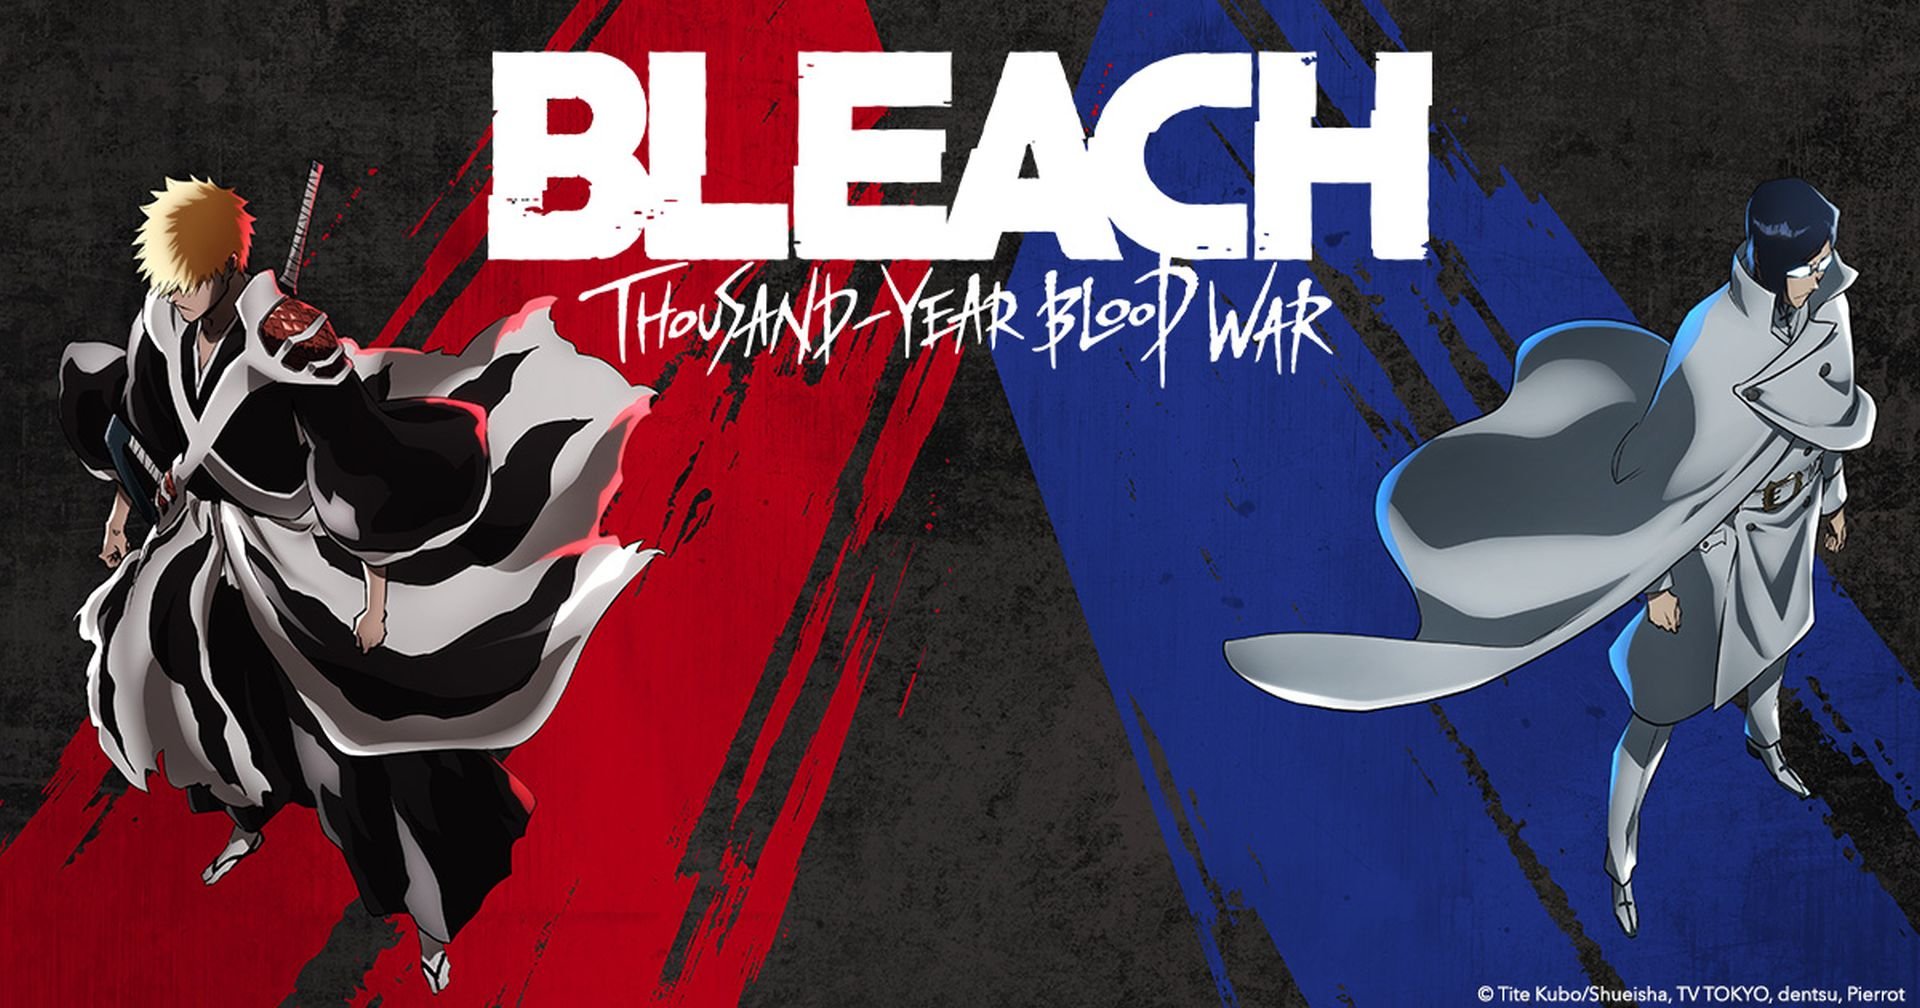 Bleach: Thousand-Year Blood War 2nd Cour Premieres on July 8